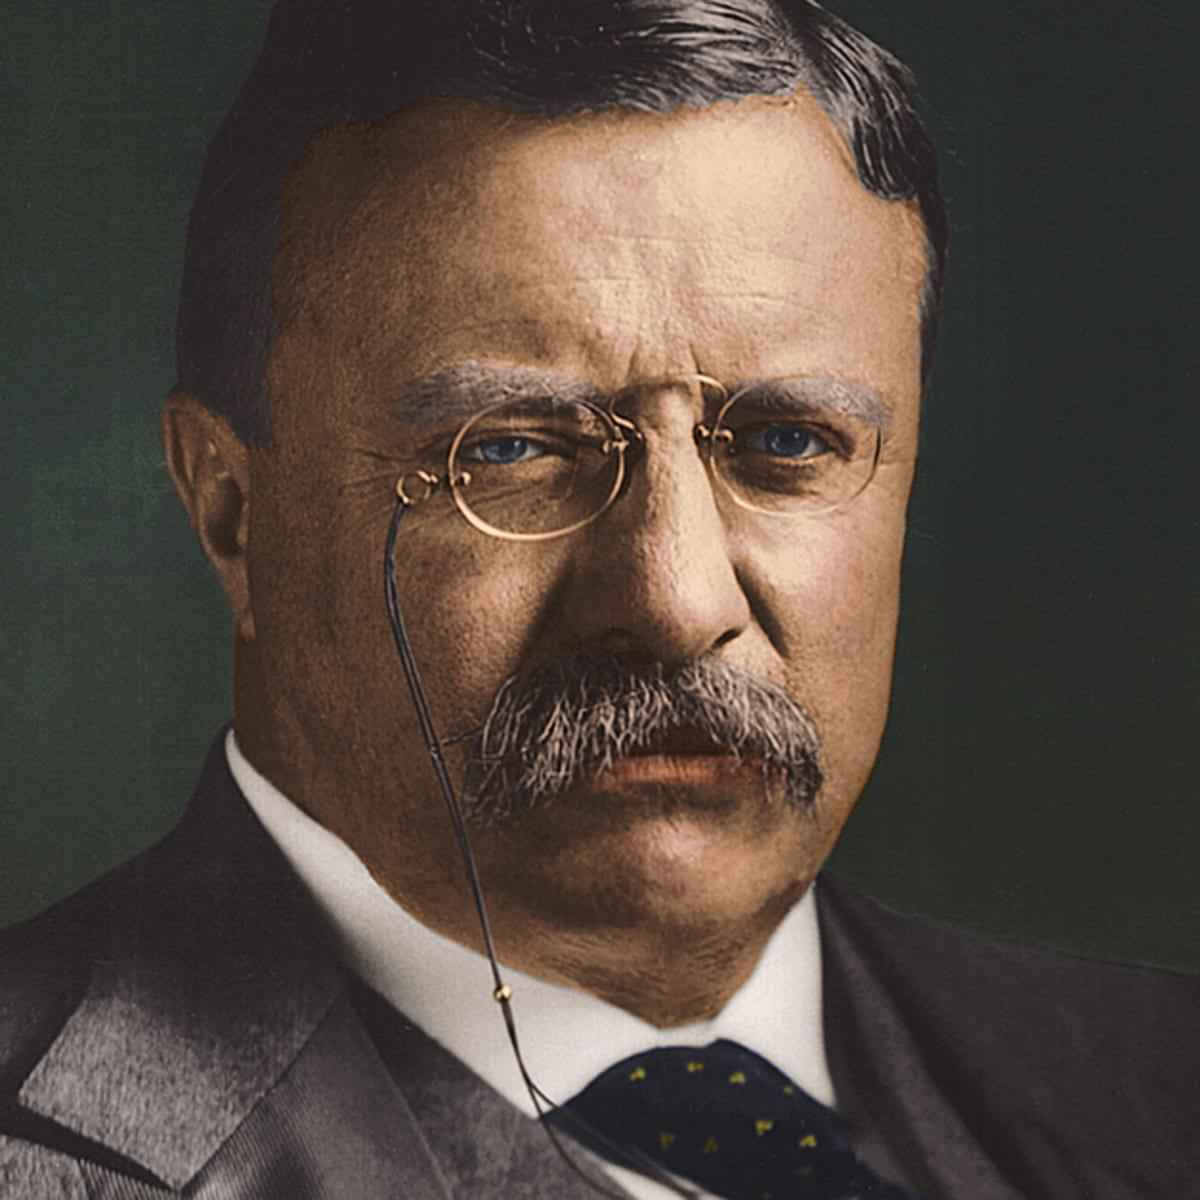 theodore Roosevelt wearing a pair of pince-nez glasses